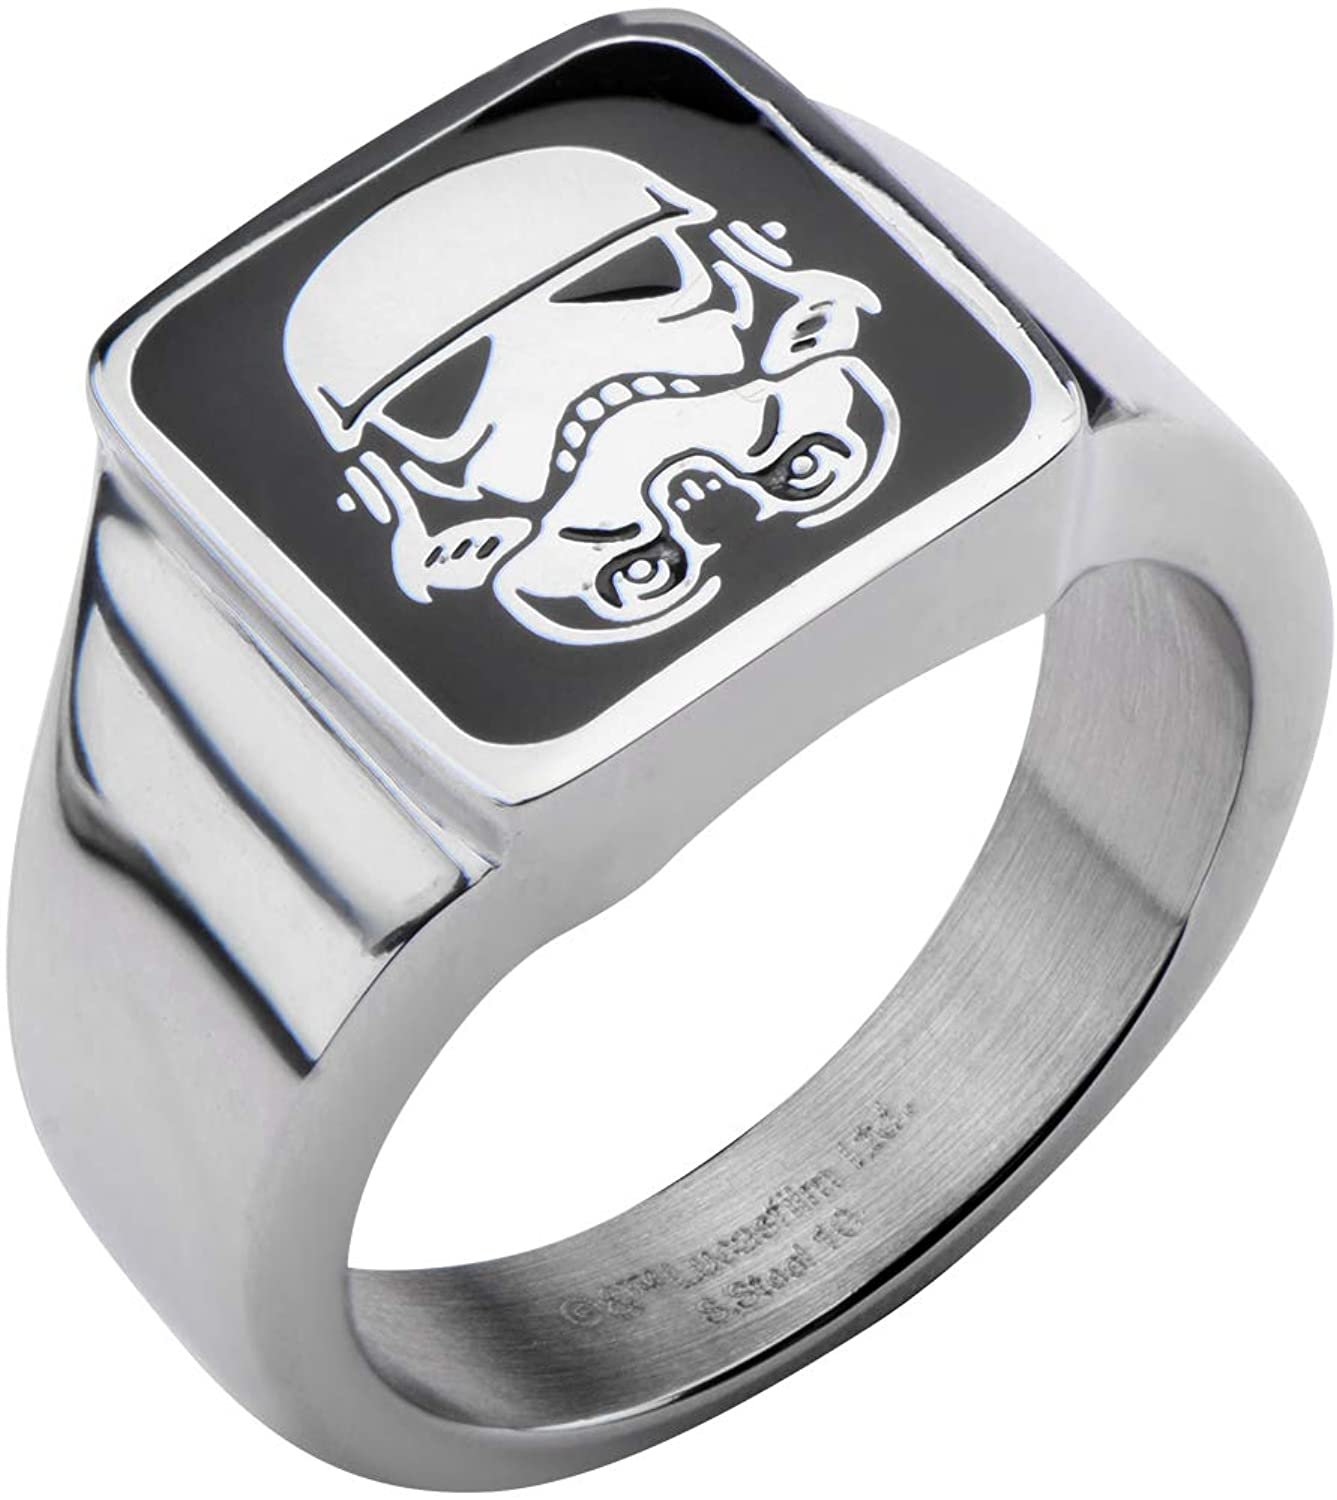 Star Wars Jewelry Men's Stainless Steel Stormtrooper Square Top Ring, Black/Silver, One Size